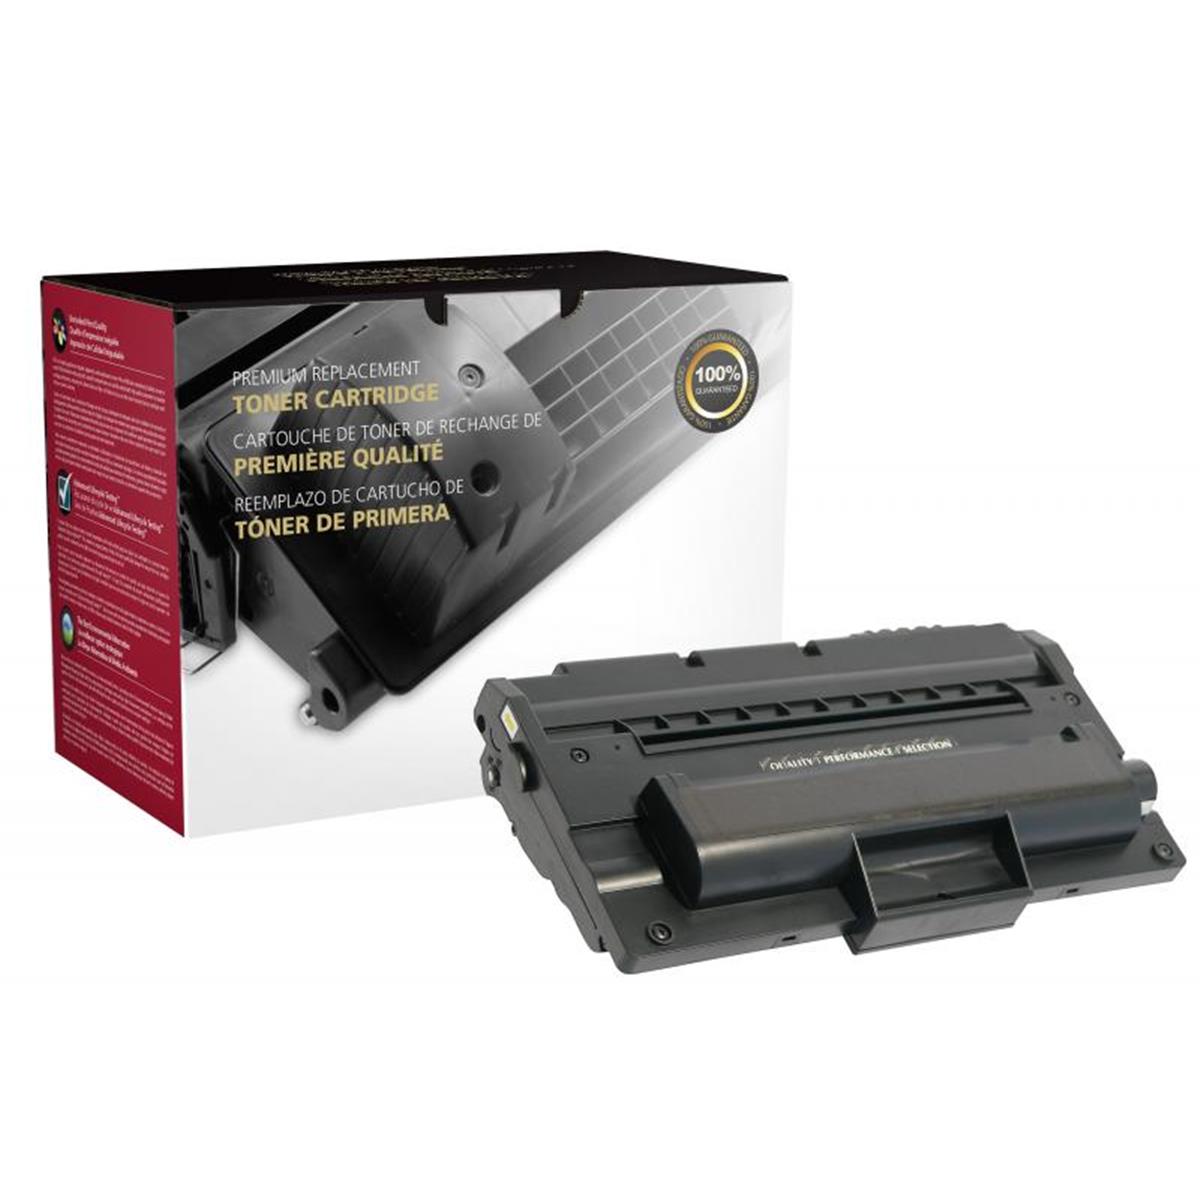 Picture of Dell 114210 High Yield Toner Cartridge for Dell 1600